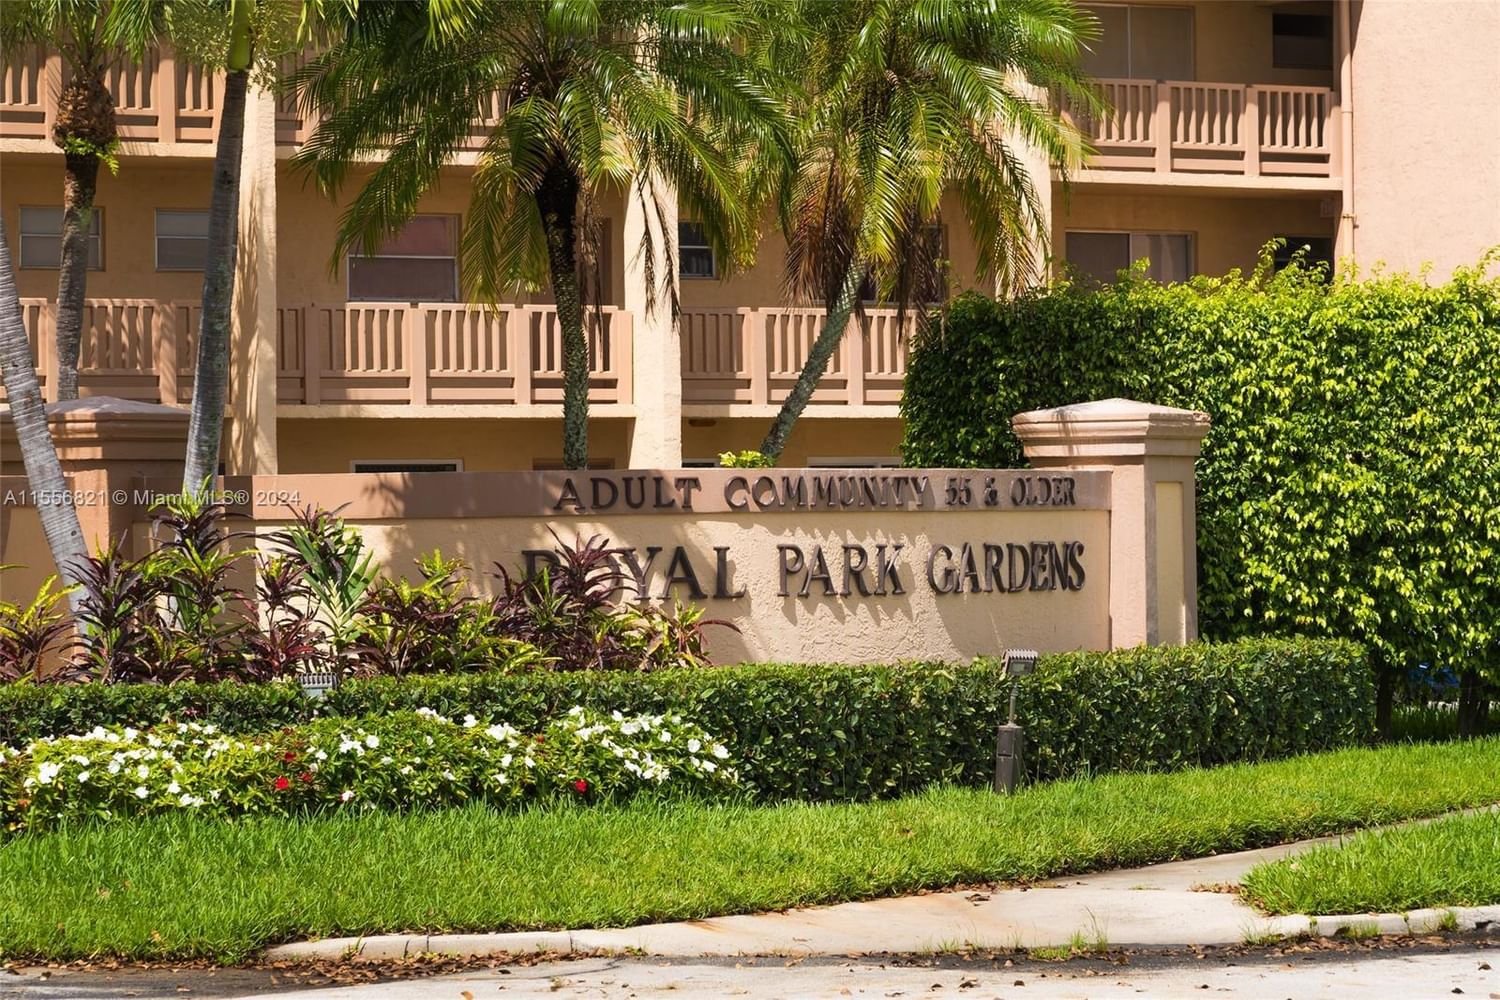 Real estate property located at 6800 Royal Palm Blvd #211F, Broward County, ROYAL PARK GARDENS III-F, Margate, FL